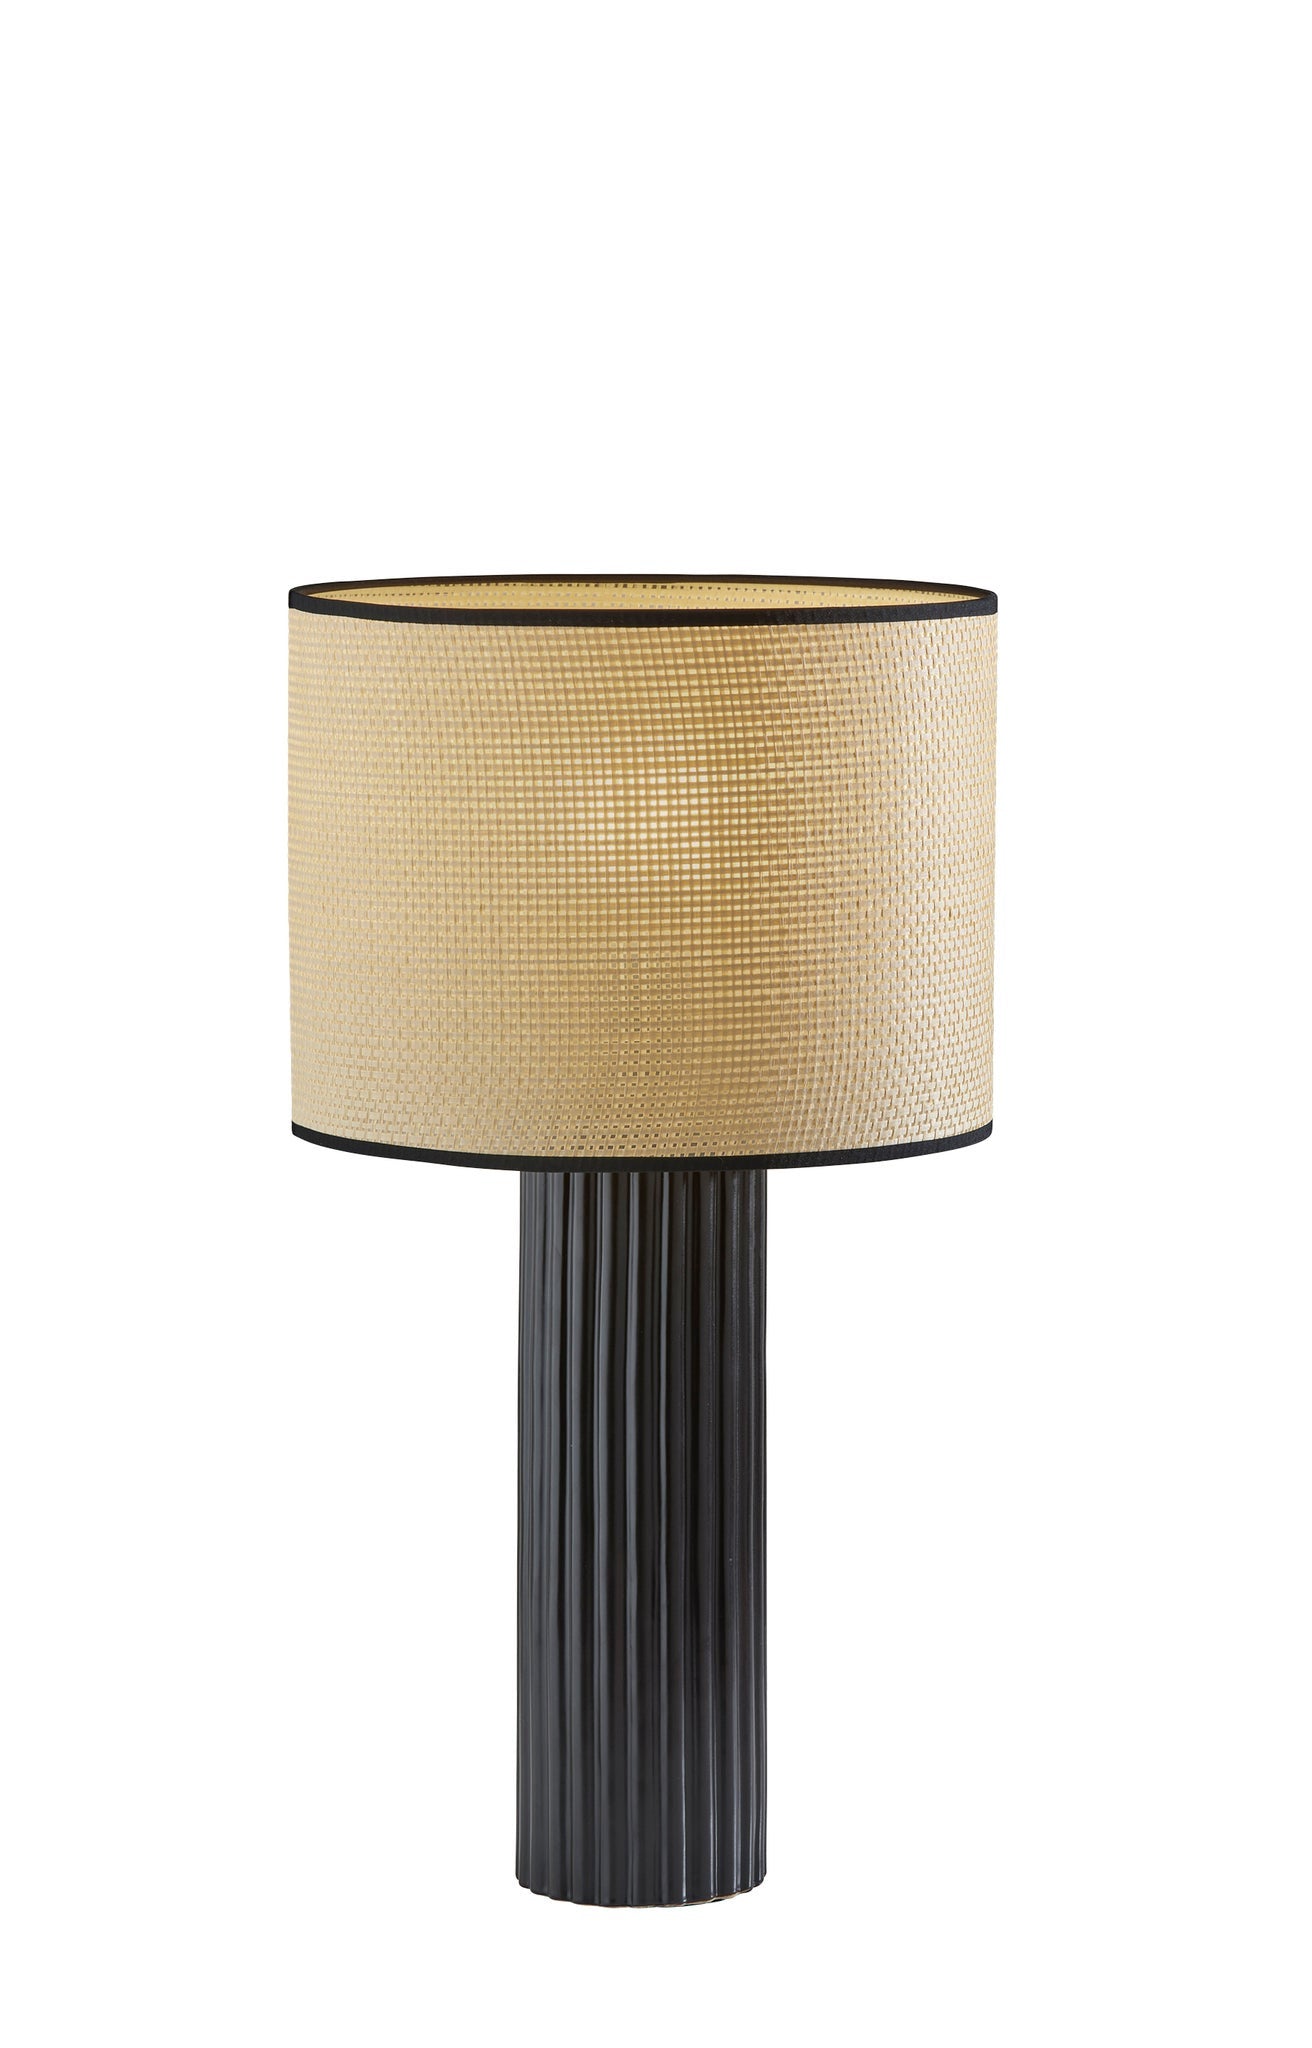 24" Black Ceramic Cylinder Table Lamp With Beige Drum Shade